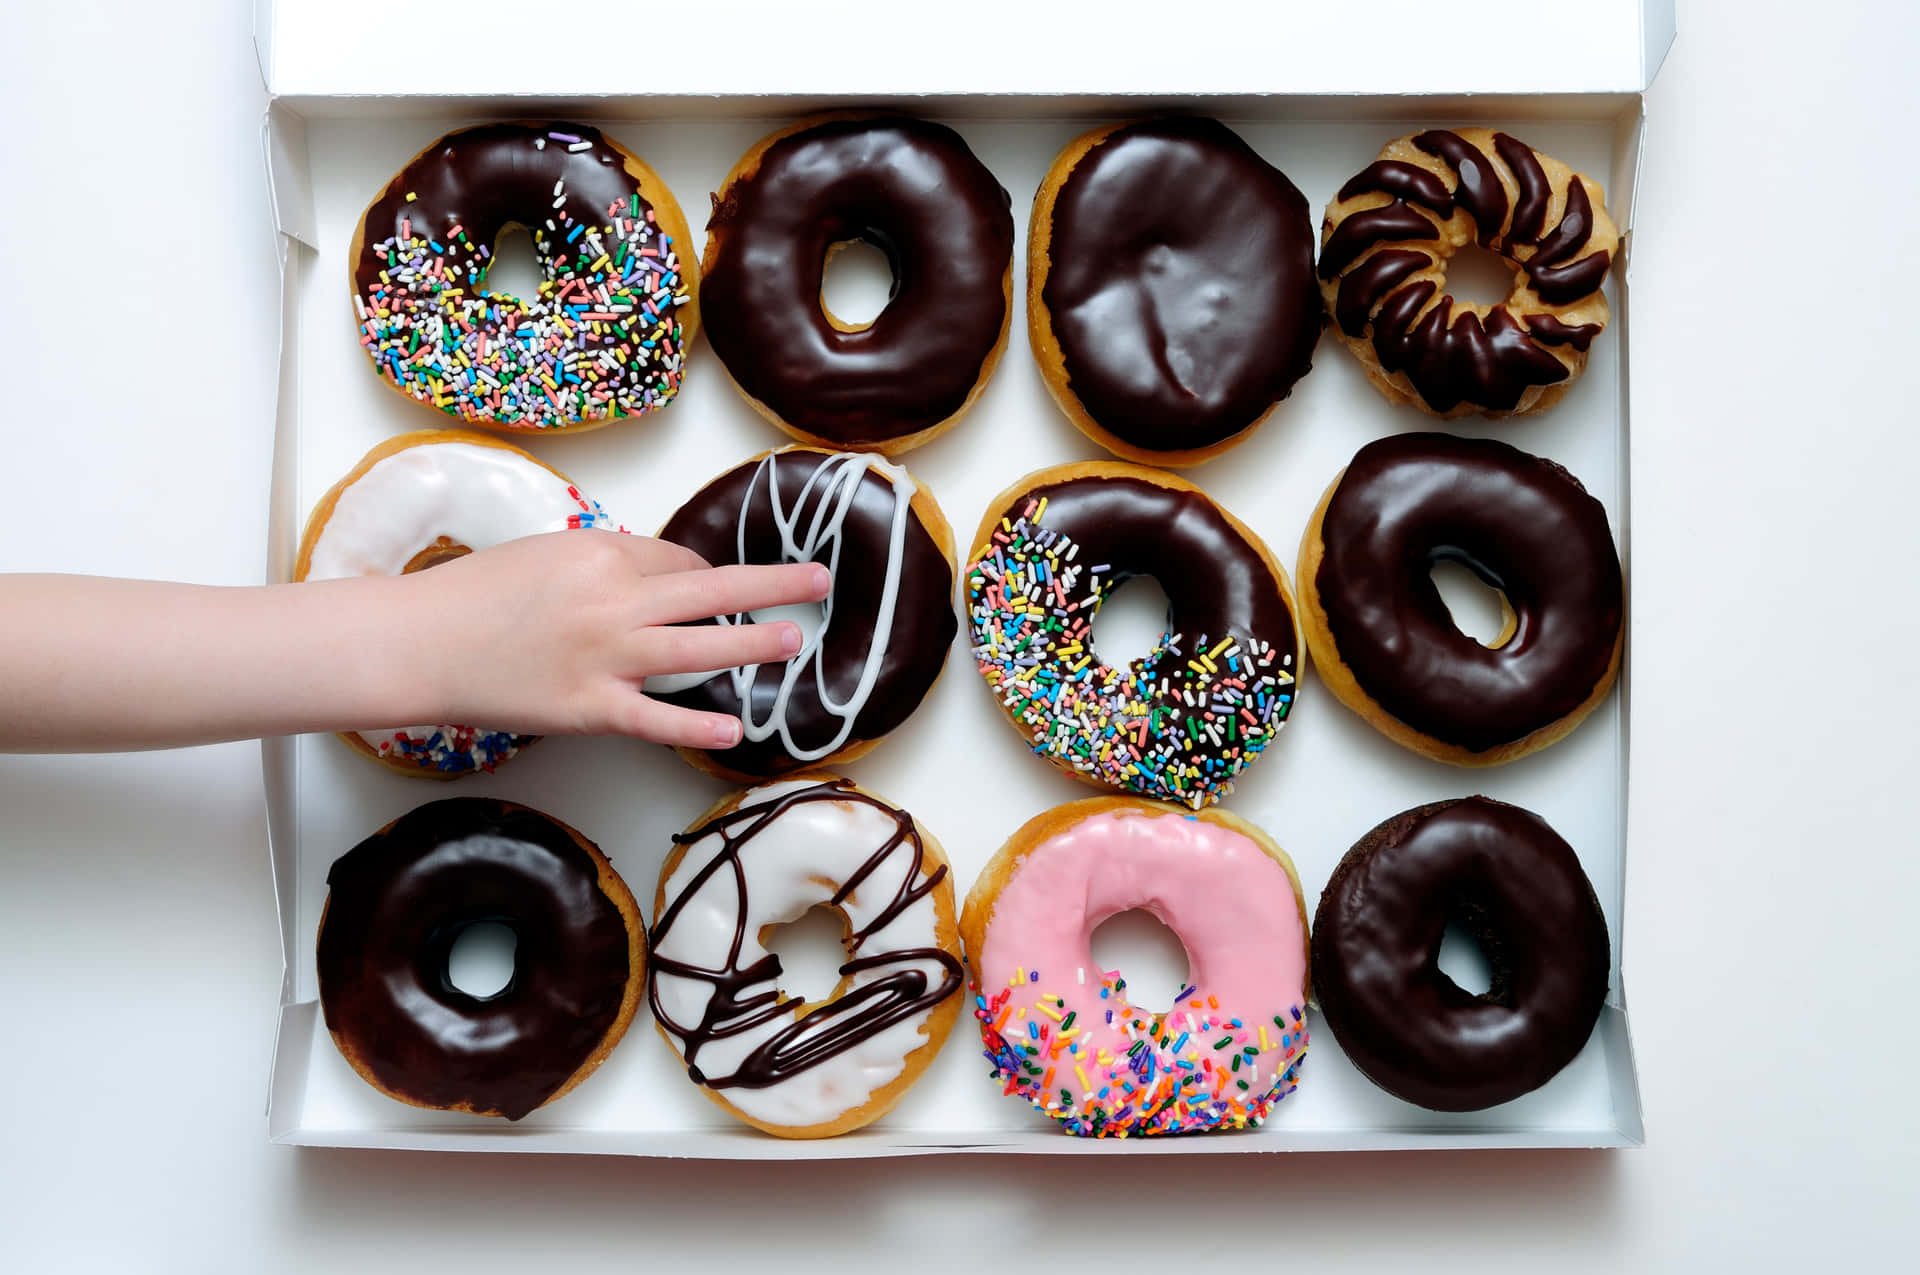 A Child Is Reaching Into A Box Of Donuts